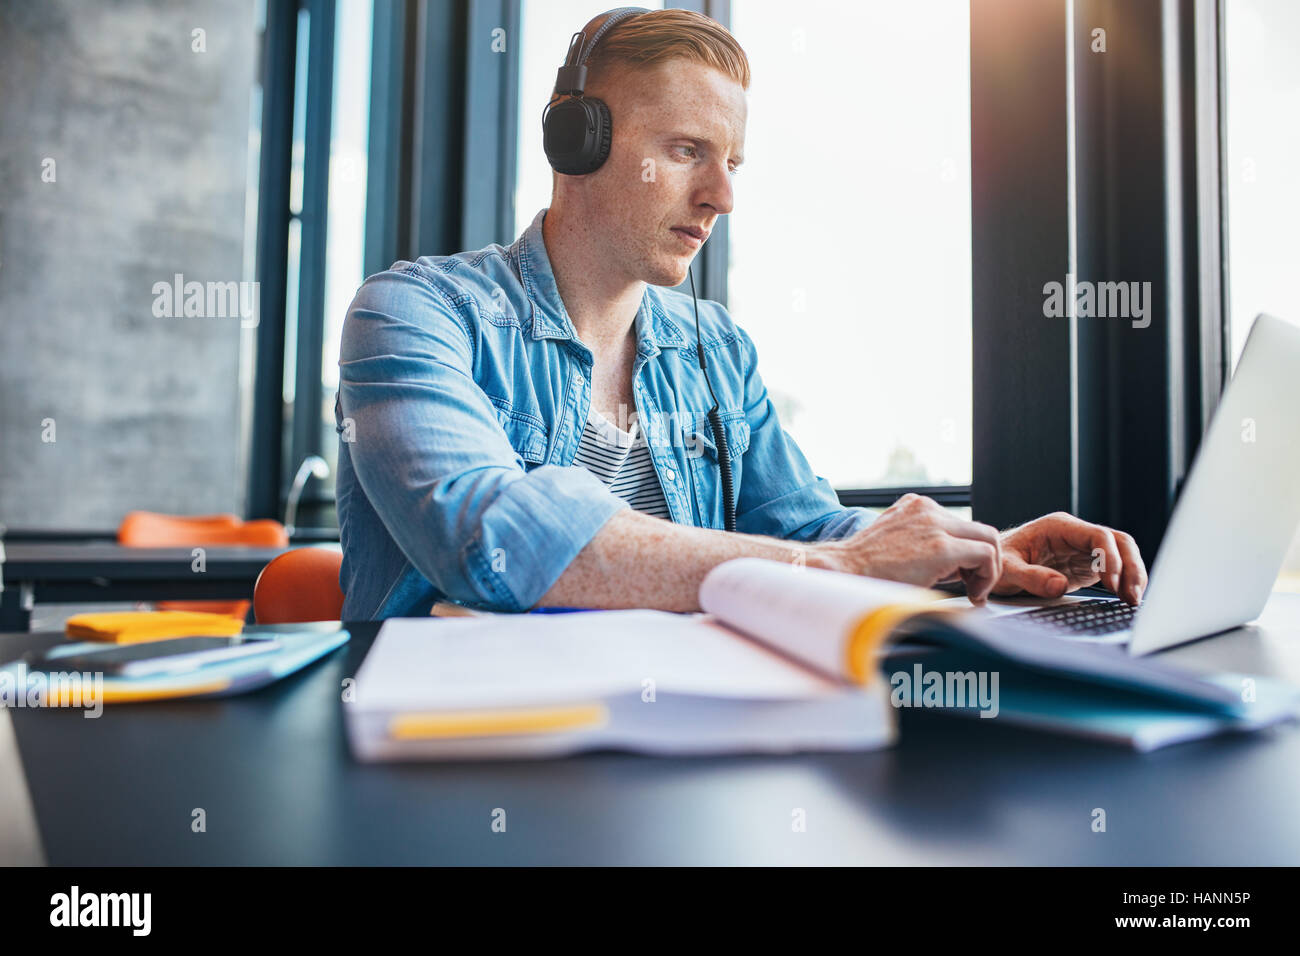 Shot of young caucasian man with headphones studying in library using laptop. University student studying with books and laptop in library. Stock Photo